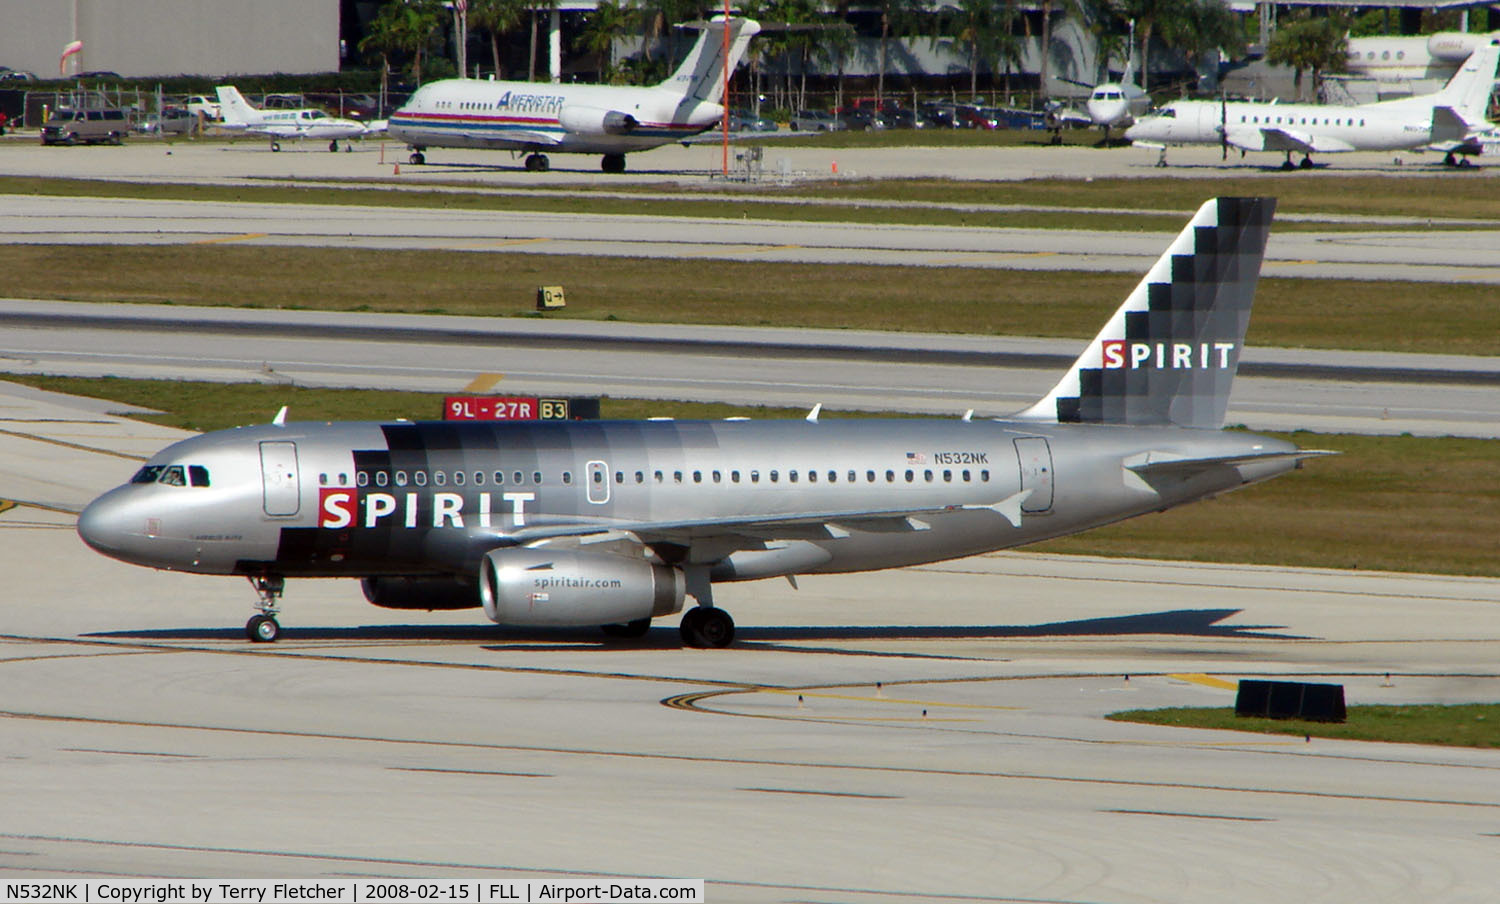 N532NK, 2007 Airbus A319-132 C/N 3165, The latest delivered A319 to Spirit at the time of photograph in Feb 2008